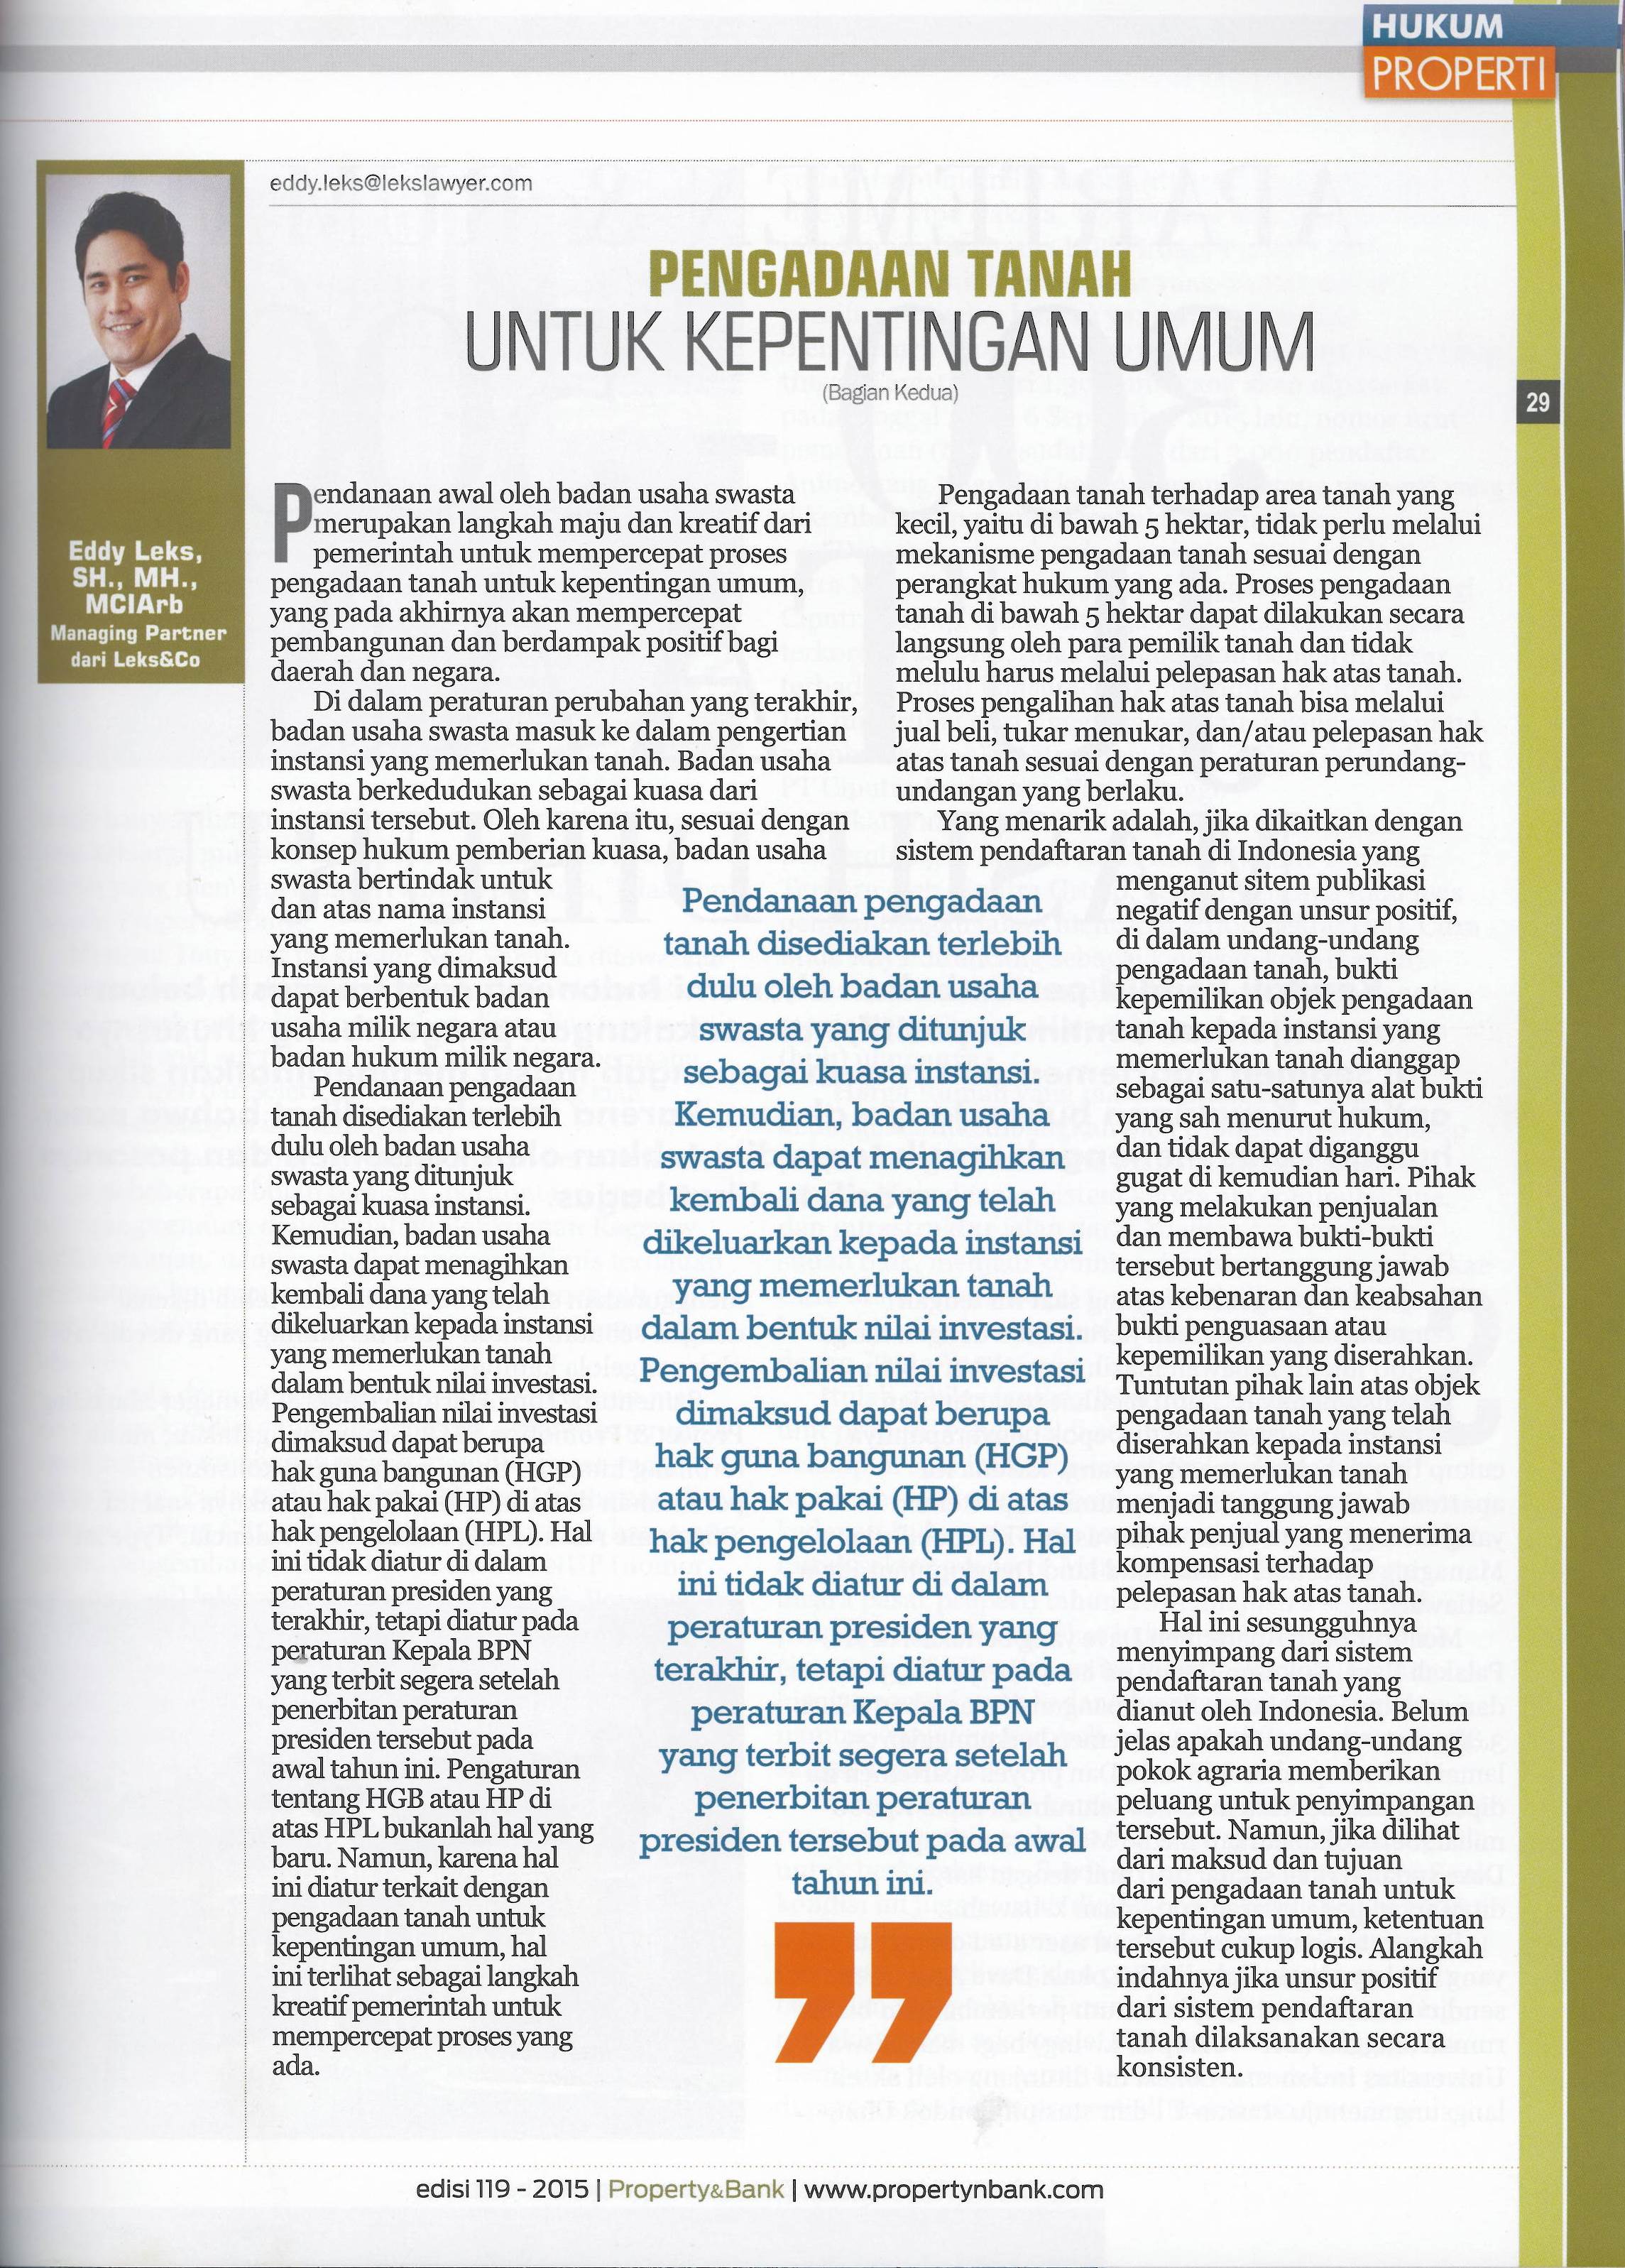 Article of Eddy Leks in Property & Bank - October 2015